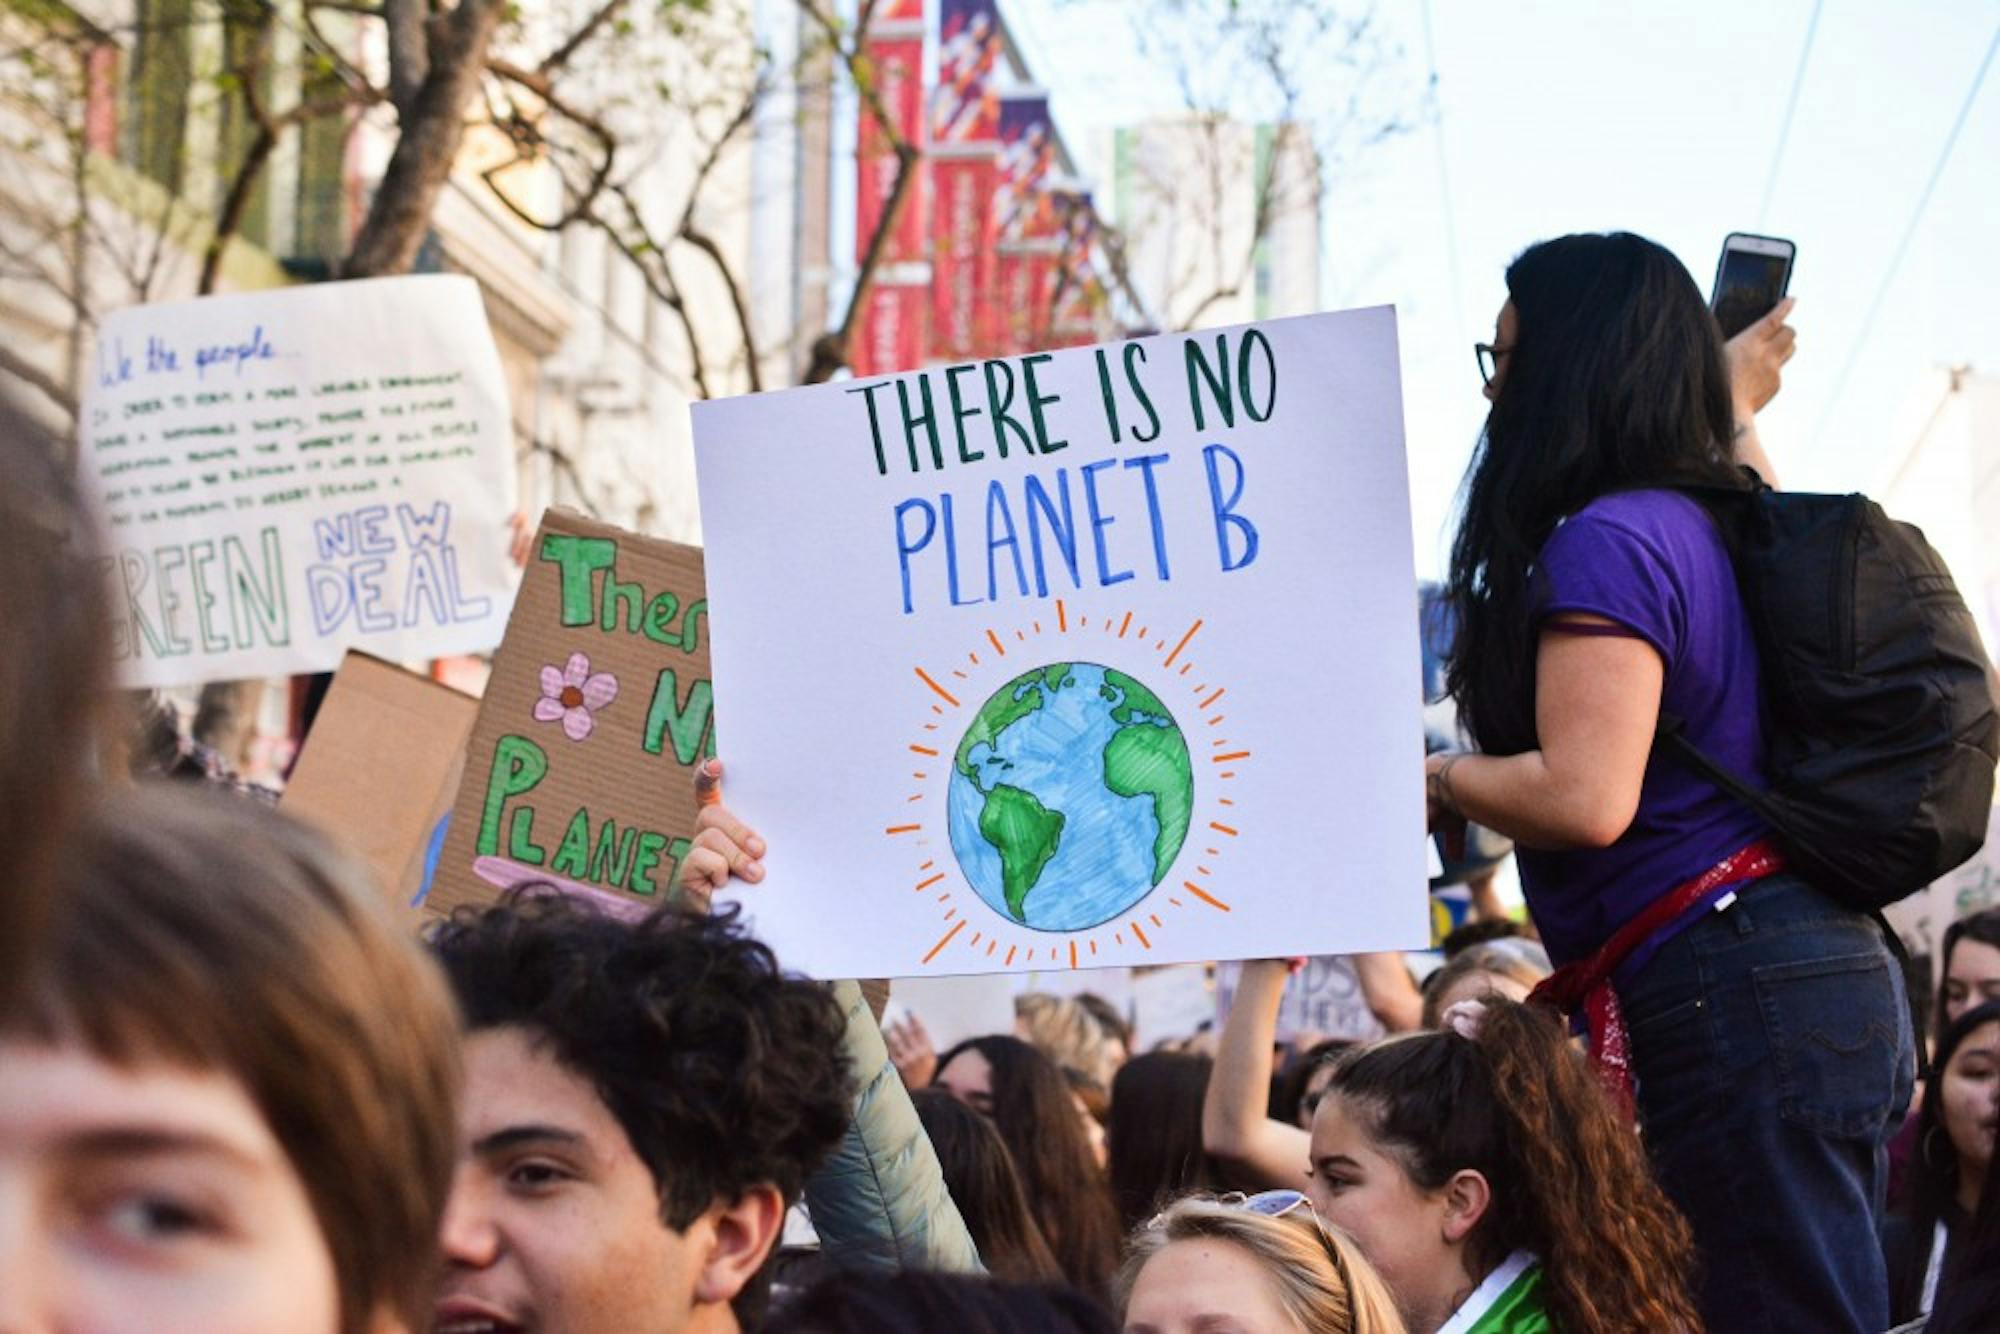 'There is no planet B' climate change activist sign